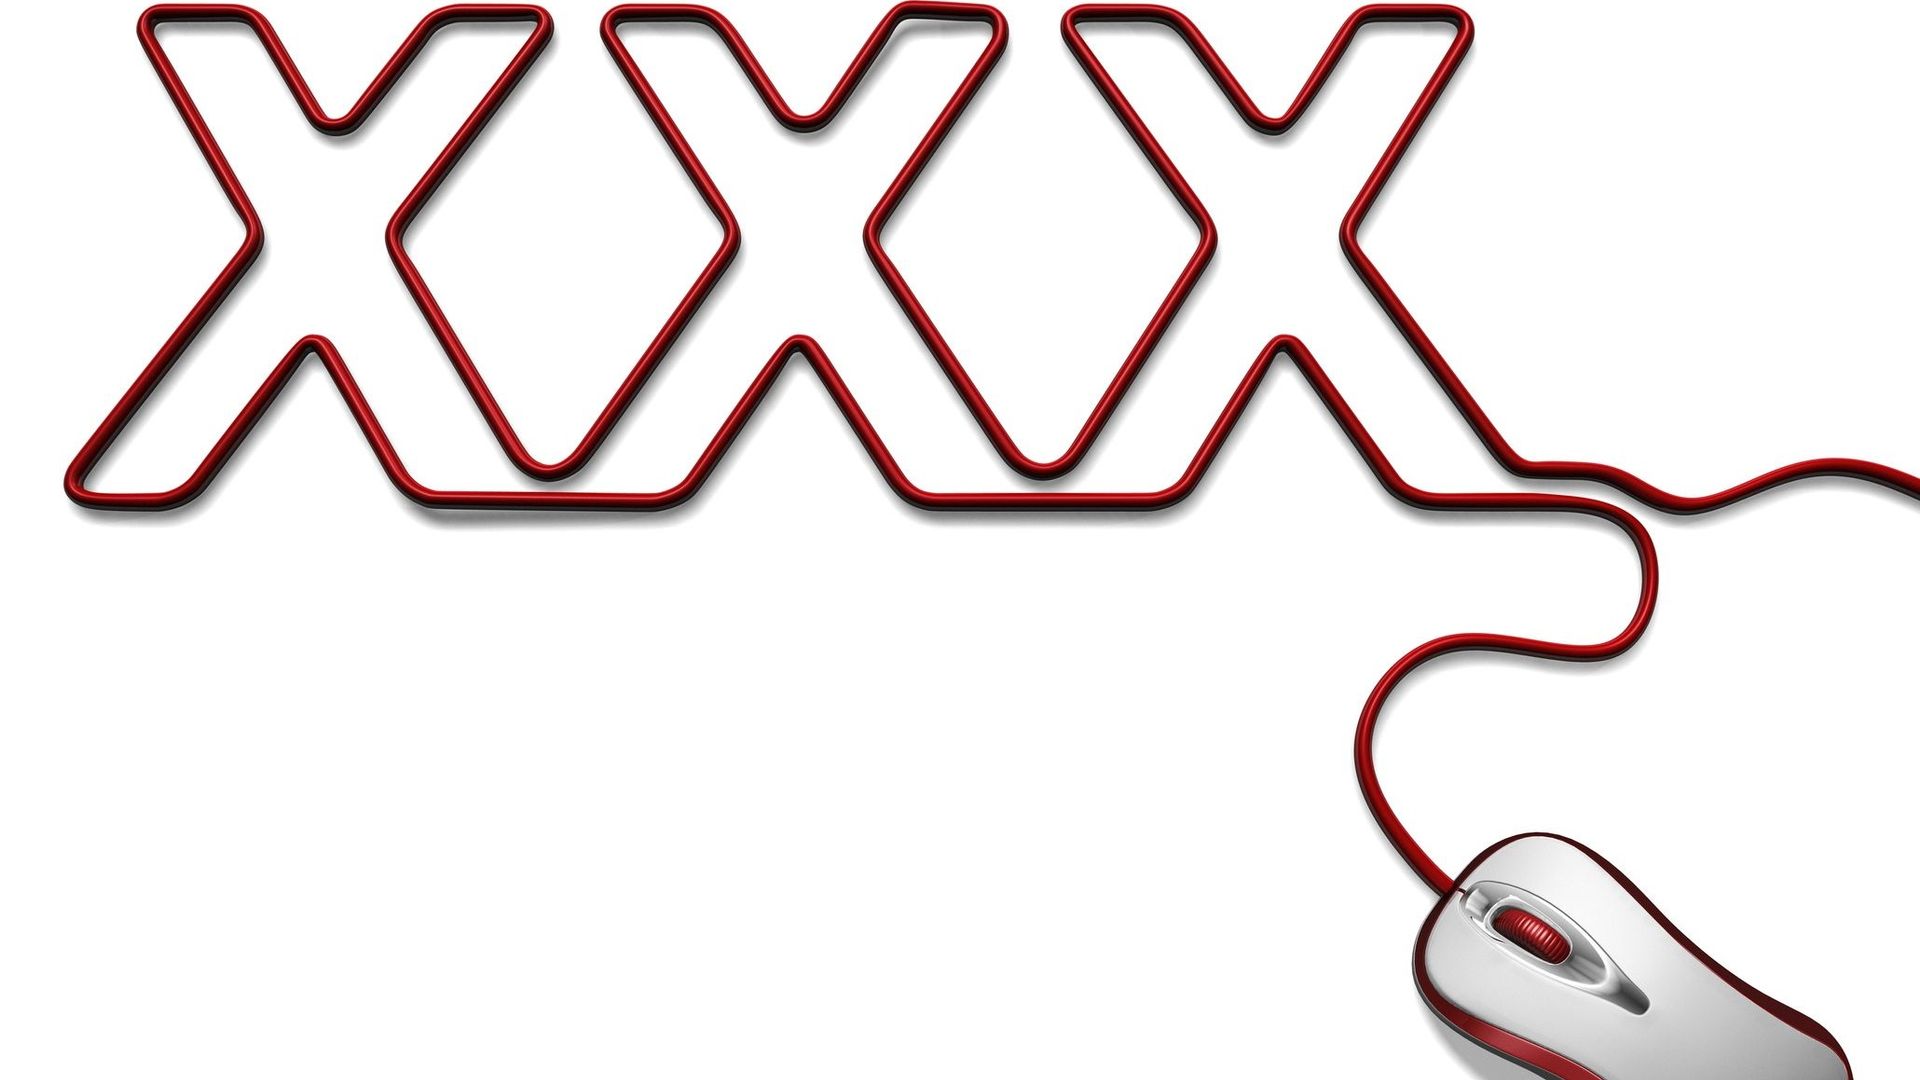 Red computer mouse with cable forming "XXX"